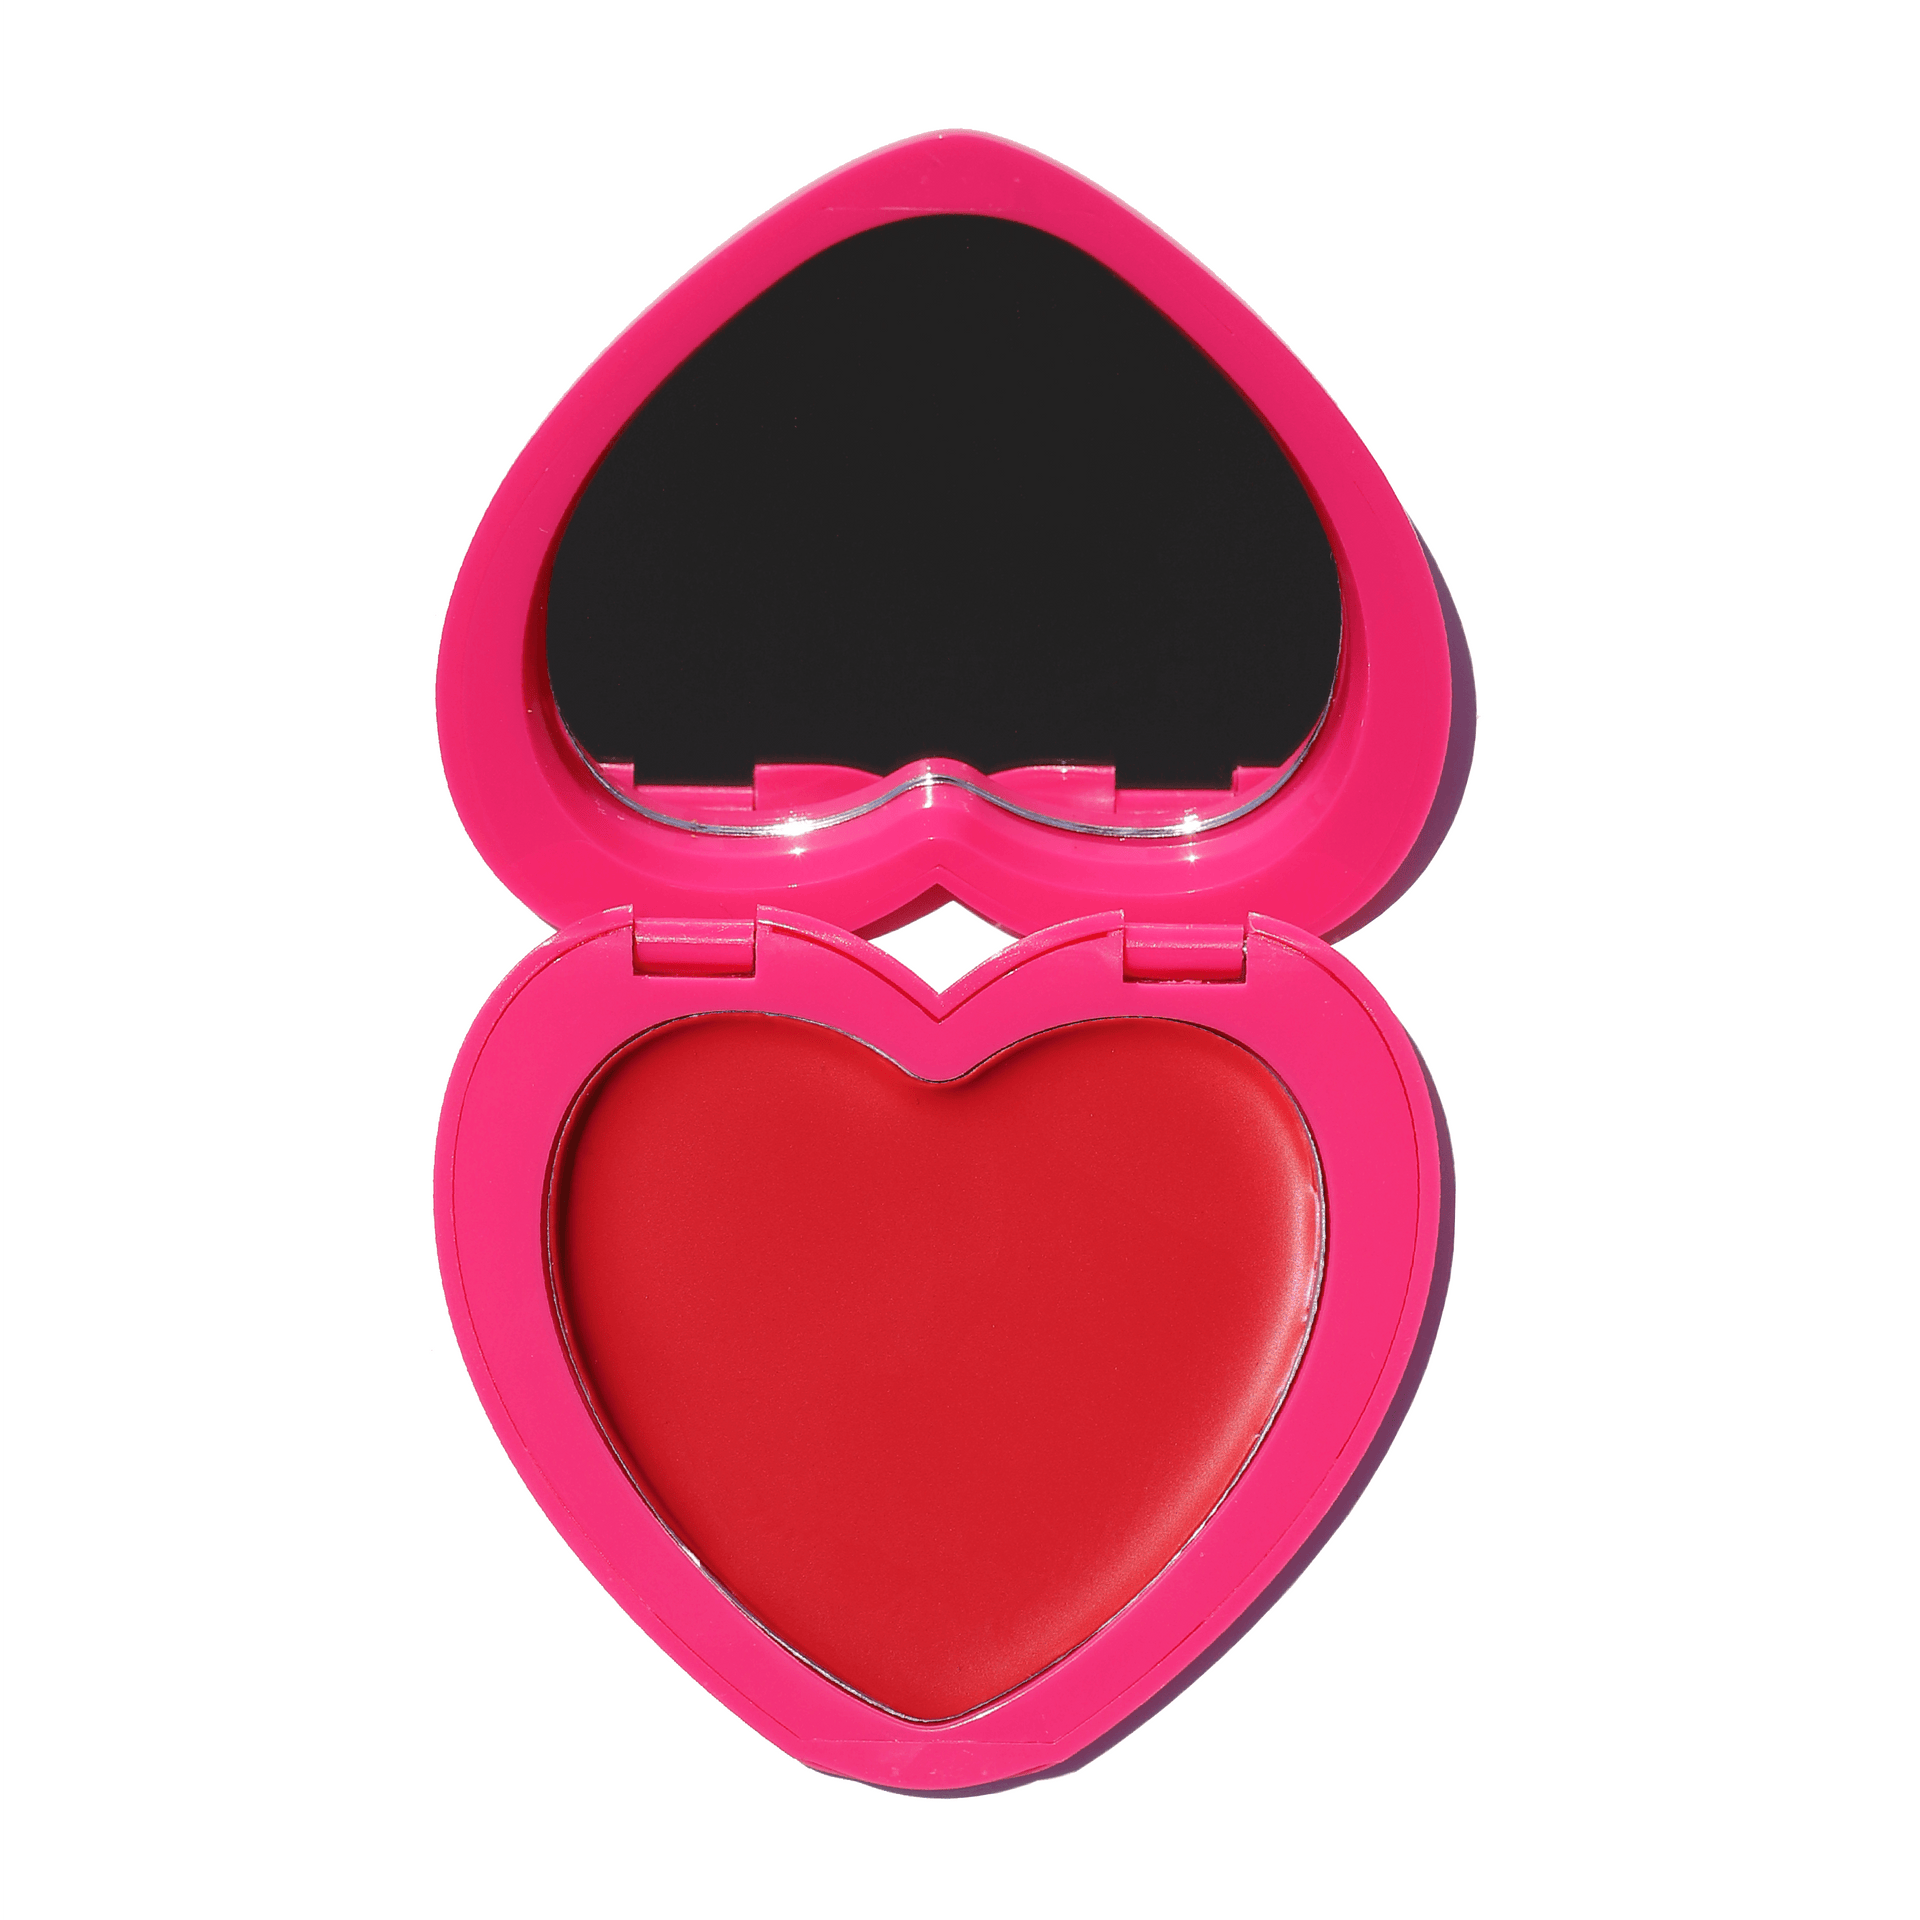 Heart-shaped Candy Paint Cheek + Lip Tint compact in radiant Candy Apple Red, showcasing the versatile cream blush for a dewy finish, complete with a built-in mirror for on-the-go touch-ups.